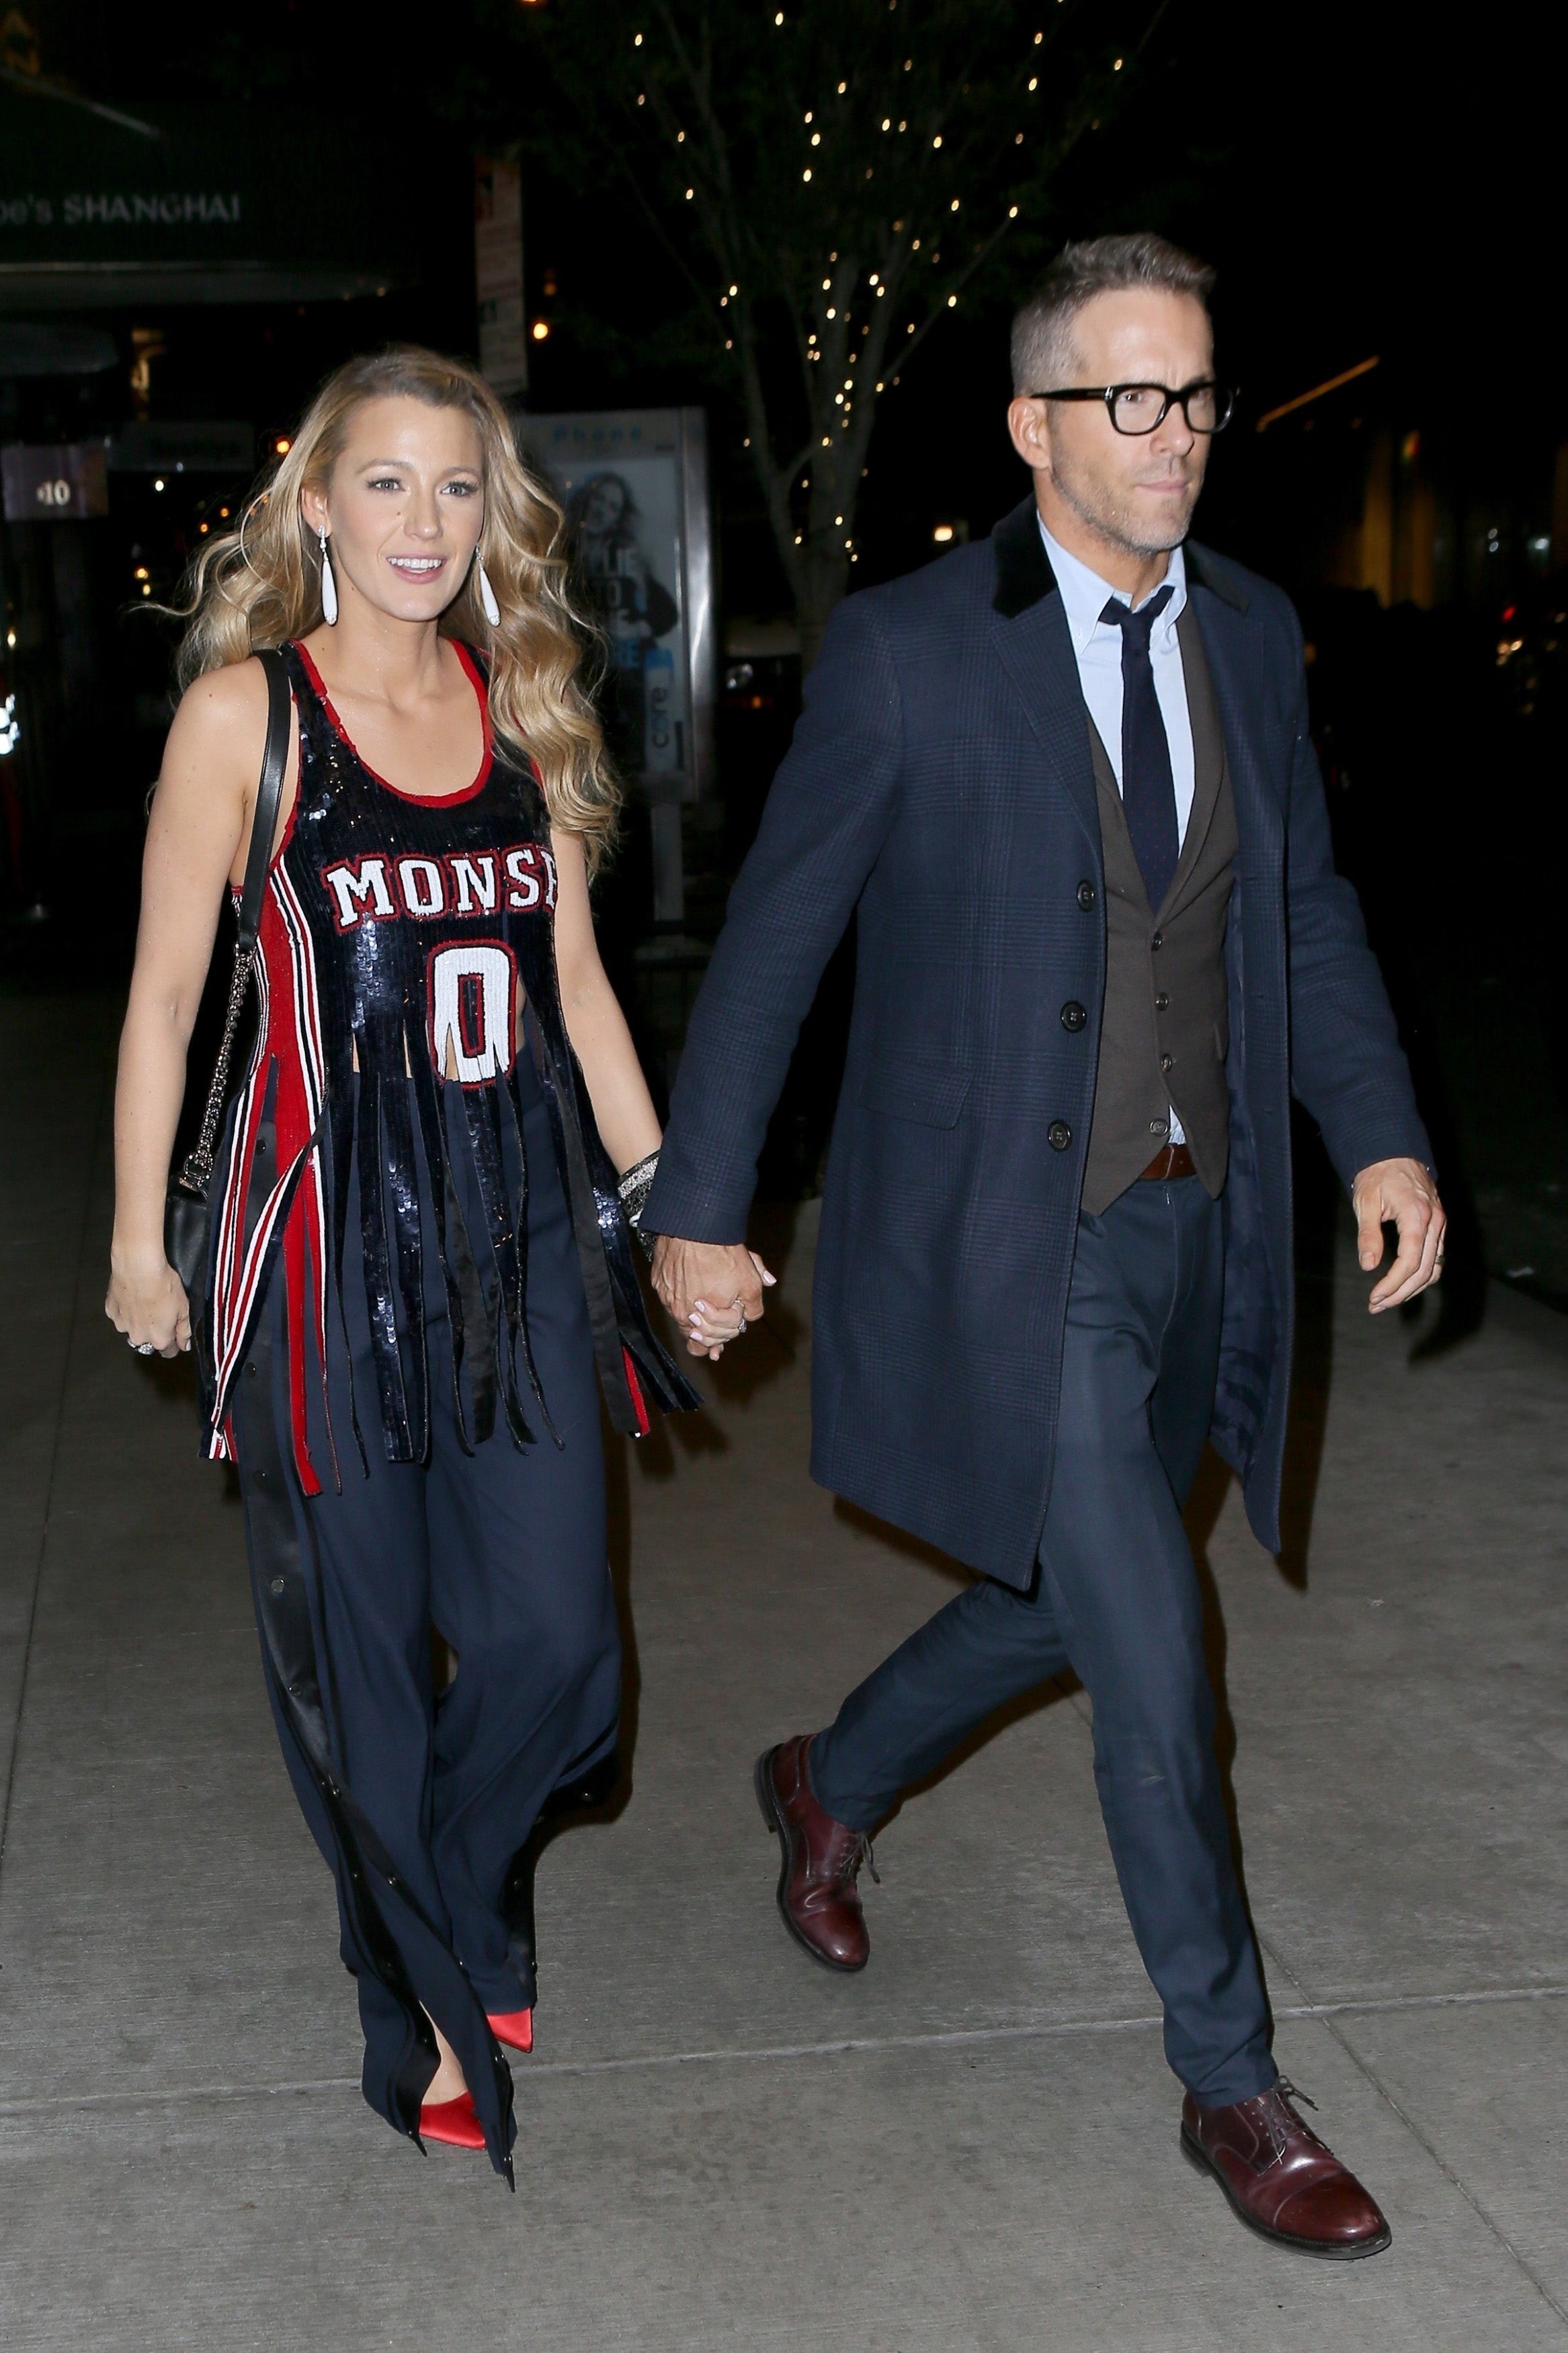 Blake Lively Stuns in Bedazzled Jersey, Holds Hands With Ryan Reynolds: Pic ...2333 x 3500